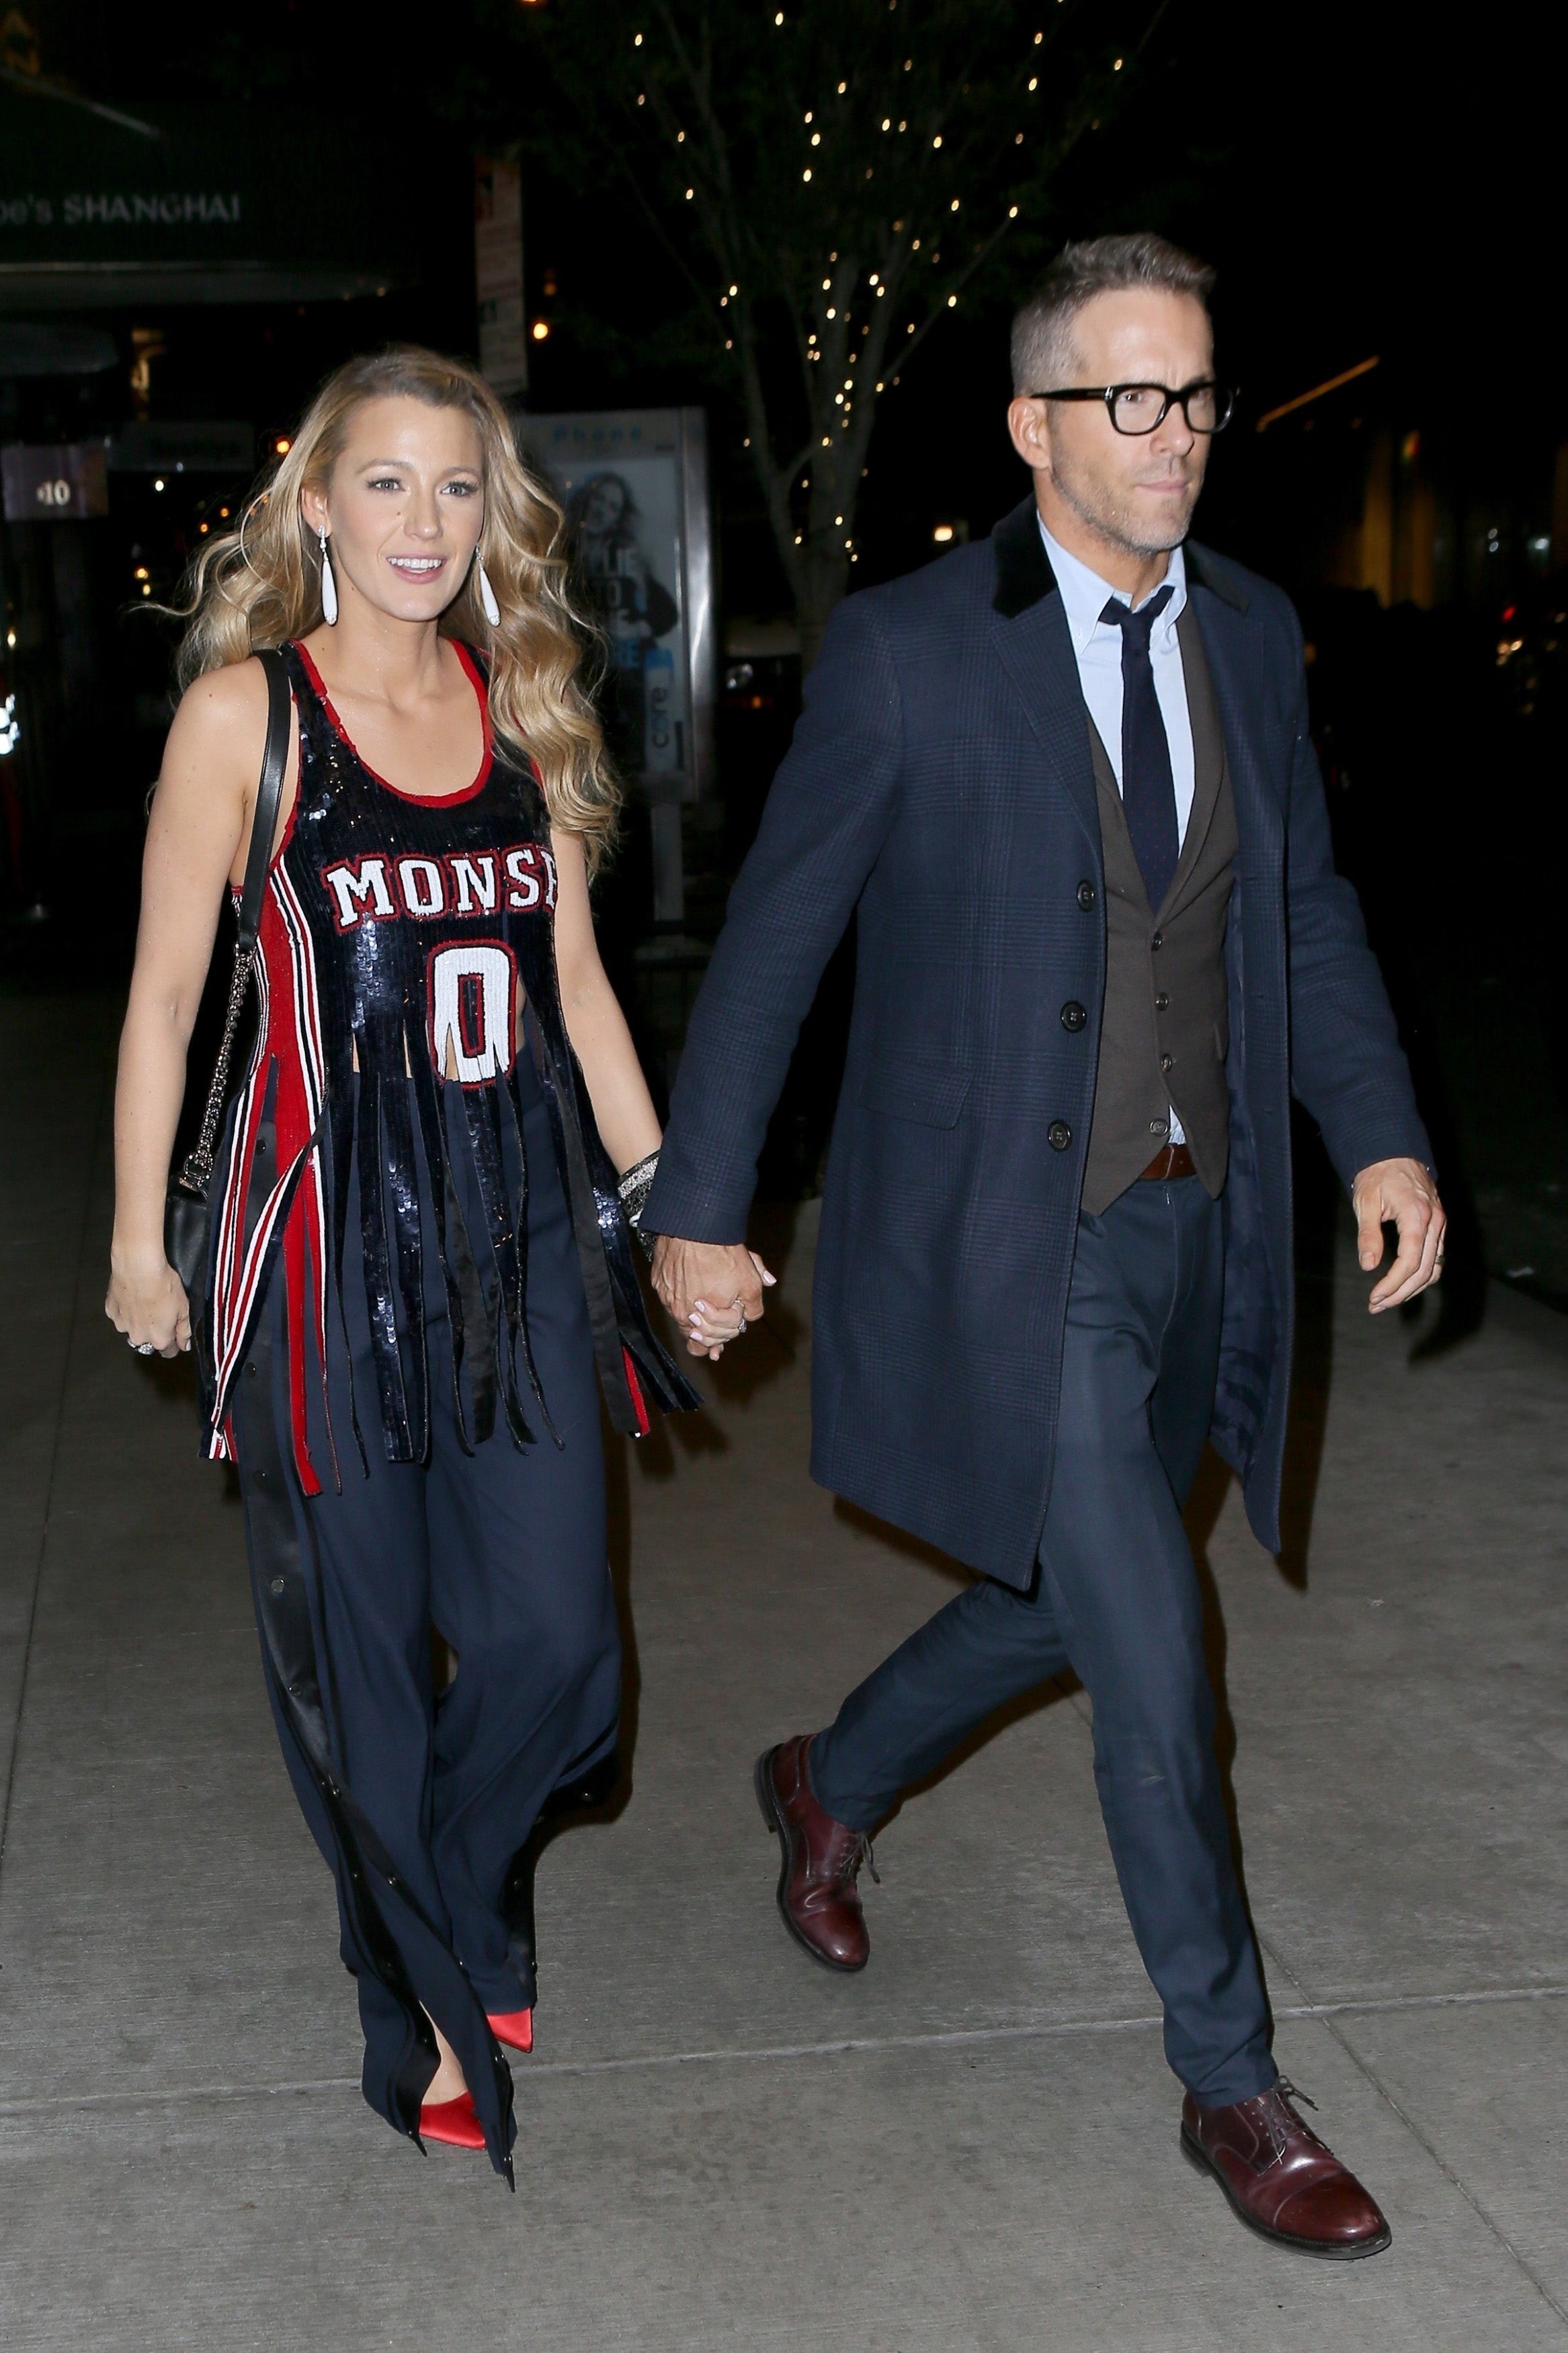 Blake Lively Stuns in Bedazzled Jersey, Holds Hands With Ryan Reynolds: Pic ...2333 x 3500